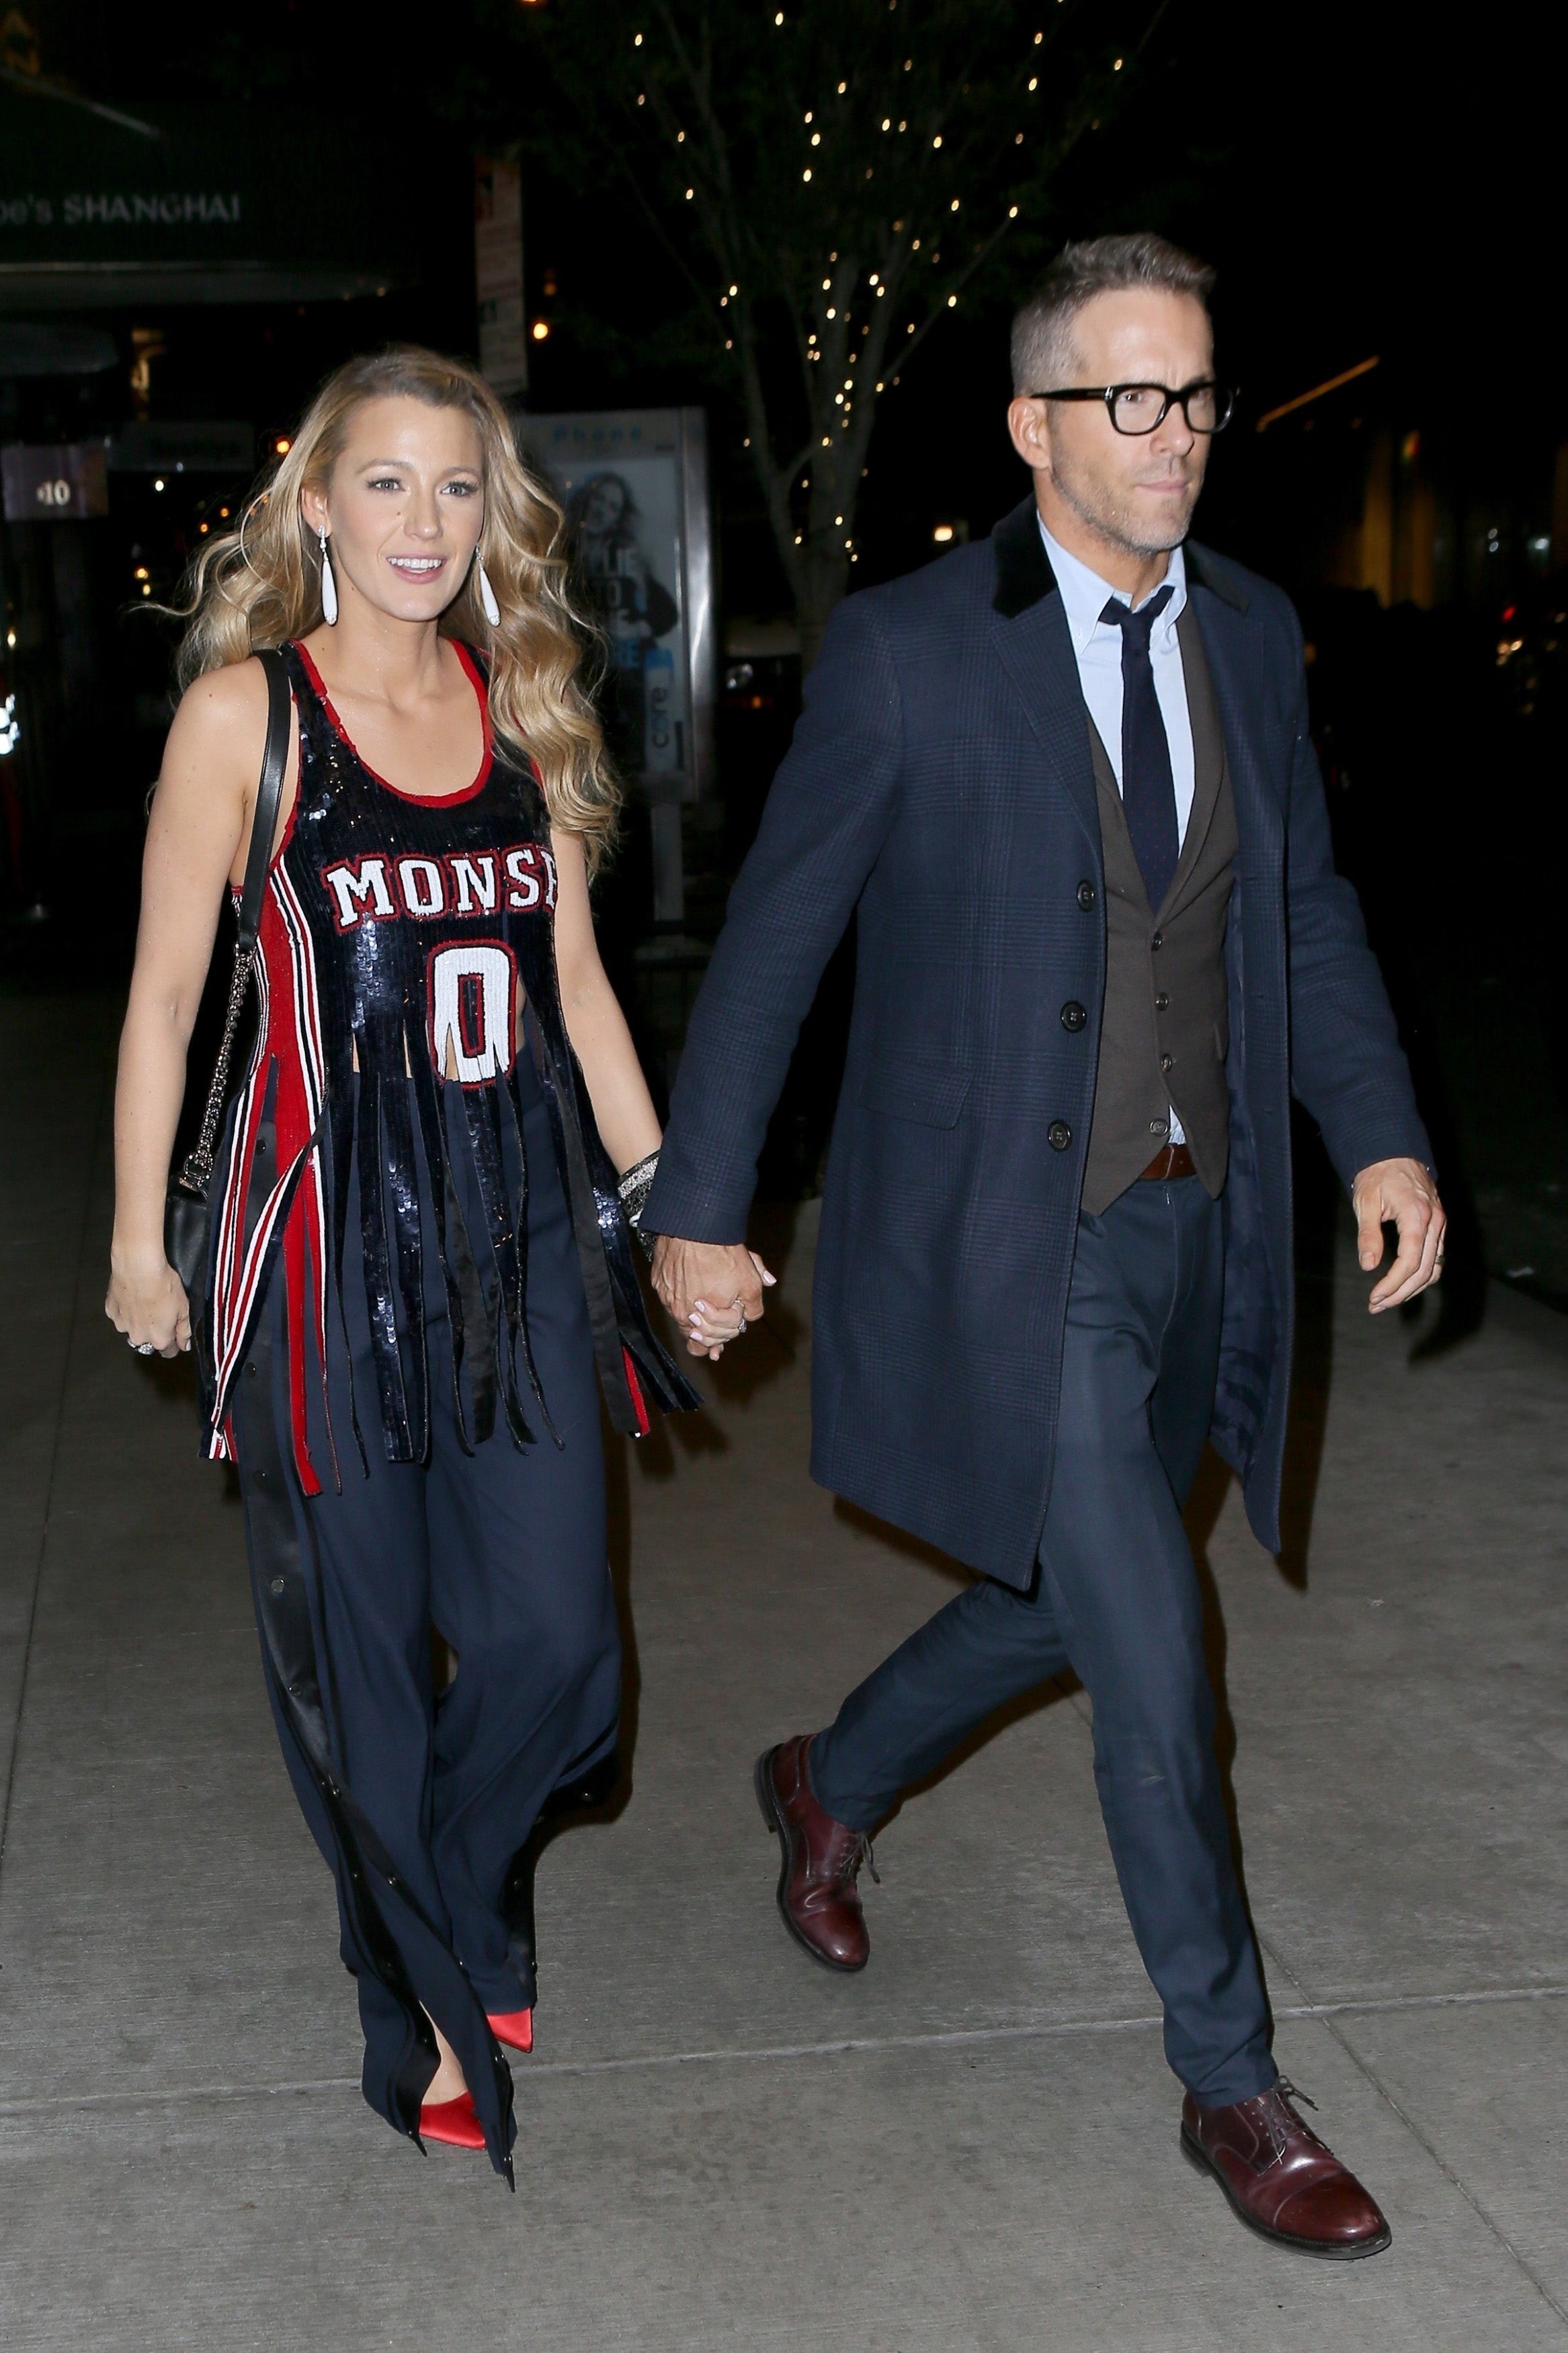 Blake Lively Stuns in Bedazzled Jersey, Holds Hands With Ryan Reynolds: Pic ...2333 x 3500